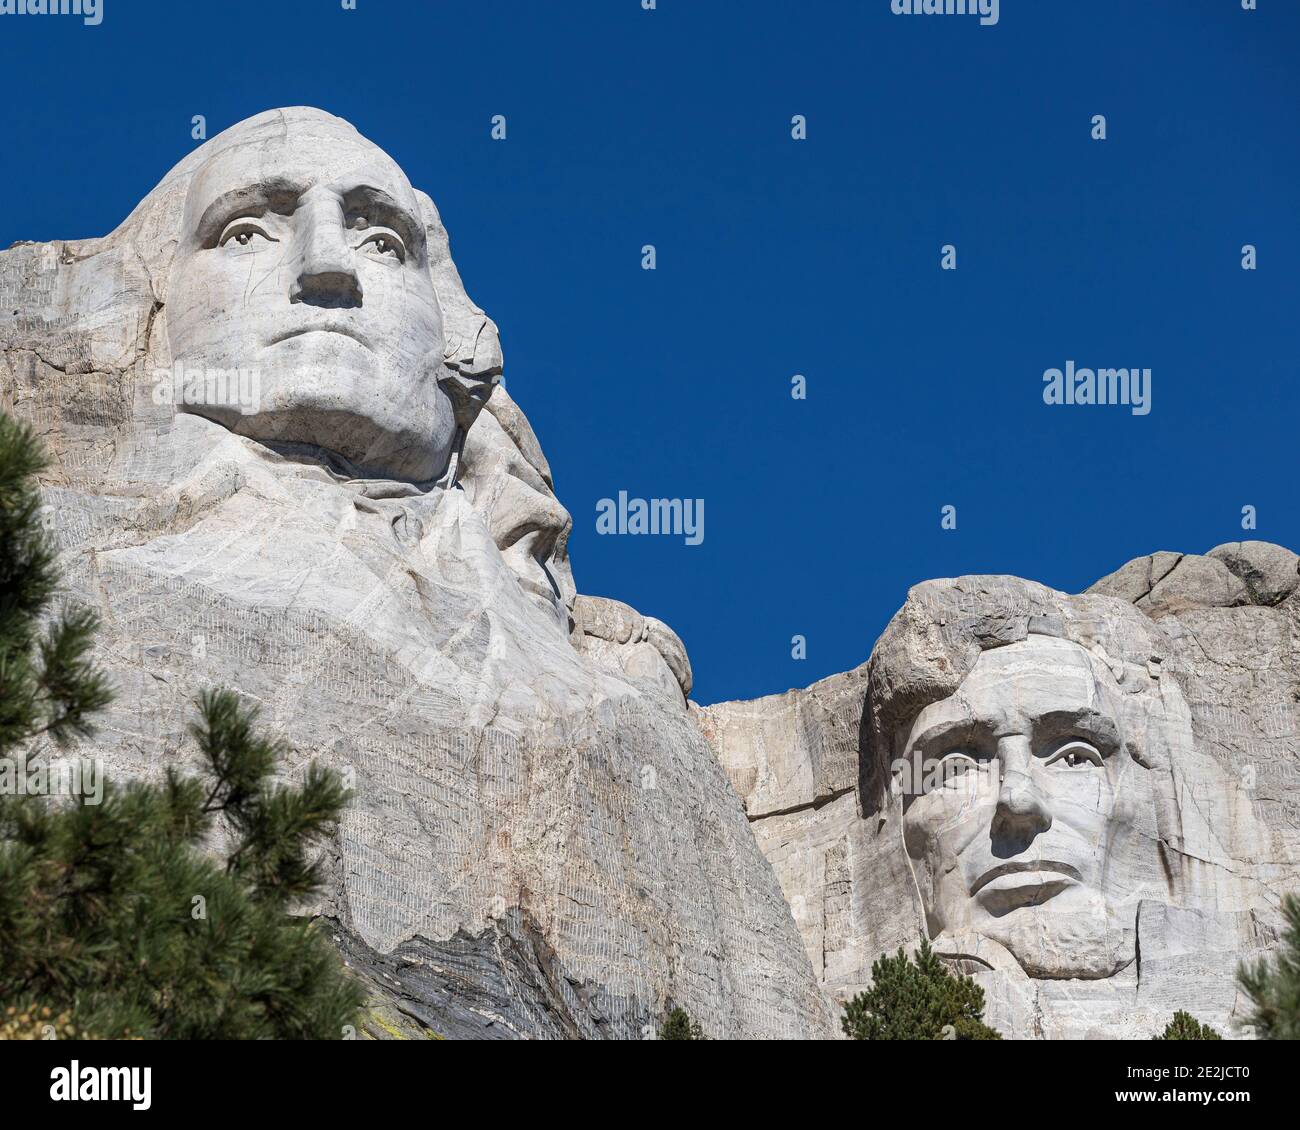 Mount Rushmore National Memorial, a true national treasure.  Symbolizing the ideals of freedom, carved into the granite face of Mount Rushmore. Stock Photo